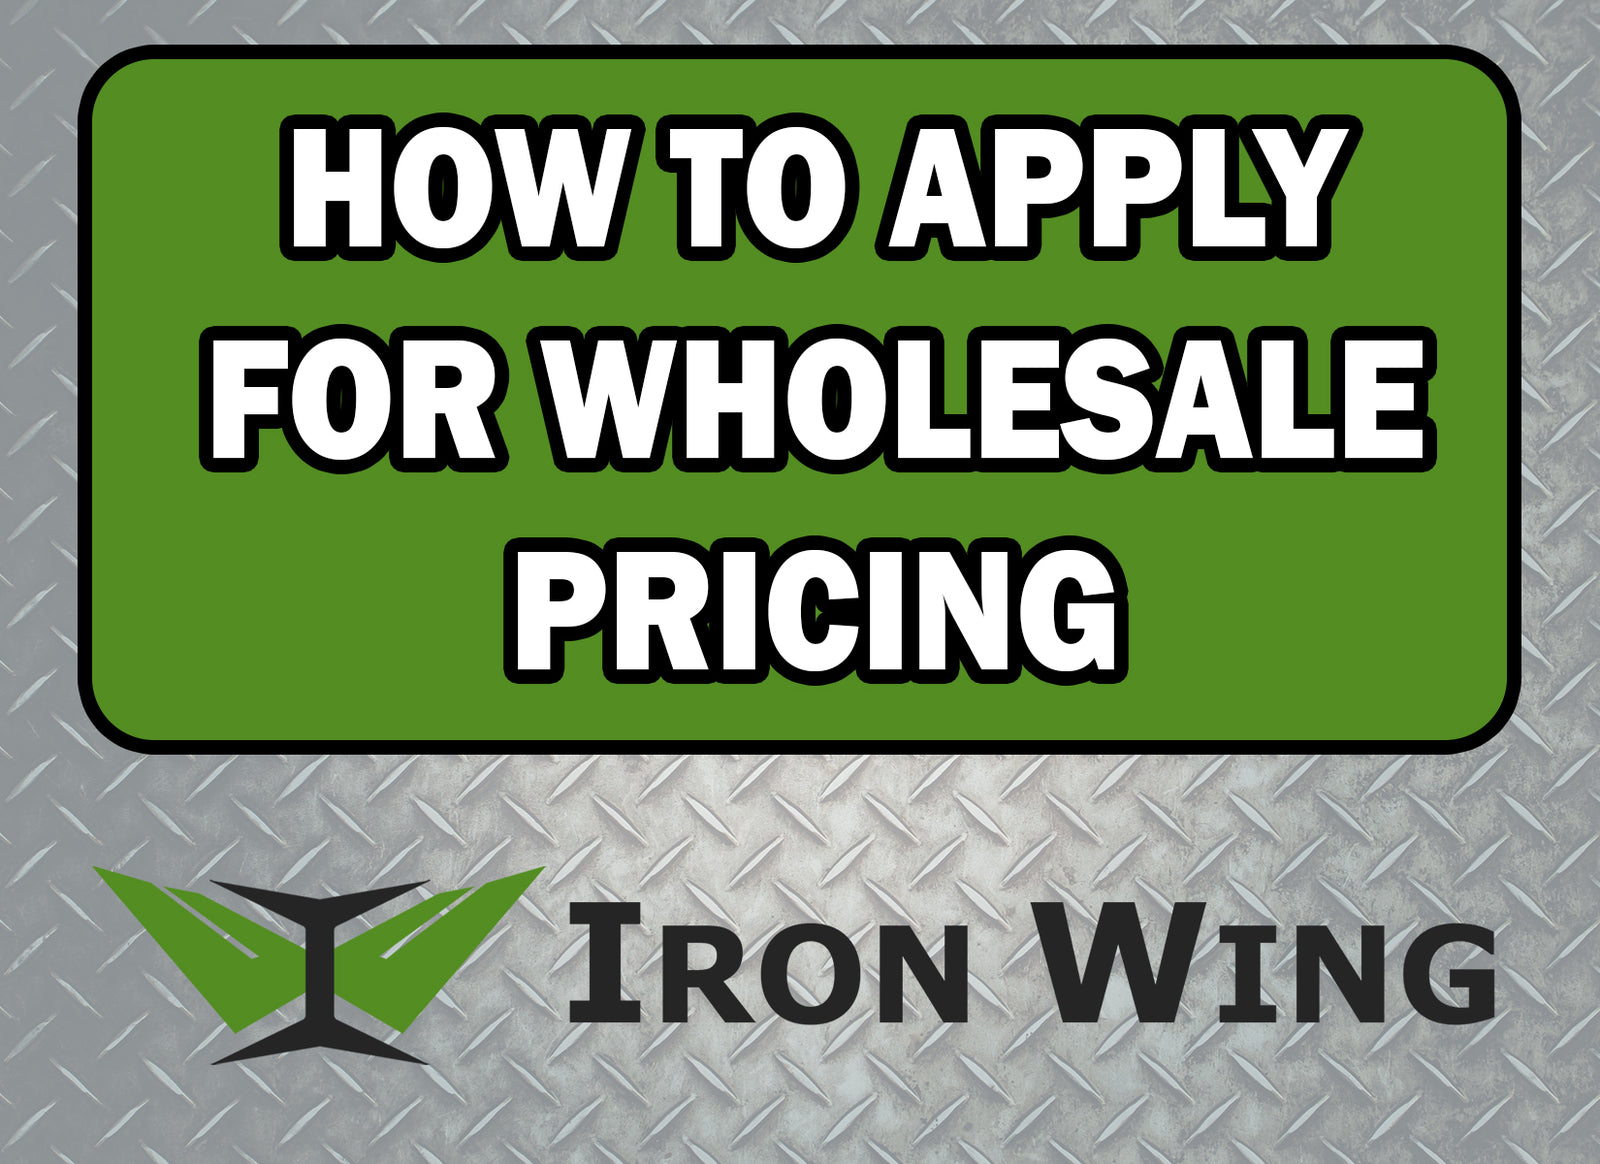 How to Apply for Wholesale Pricing